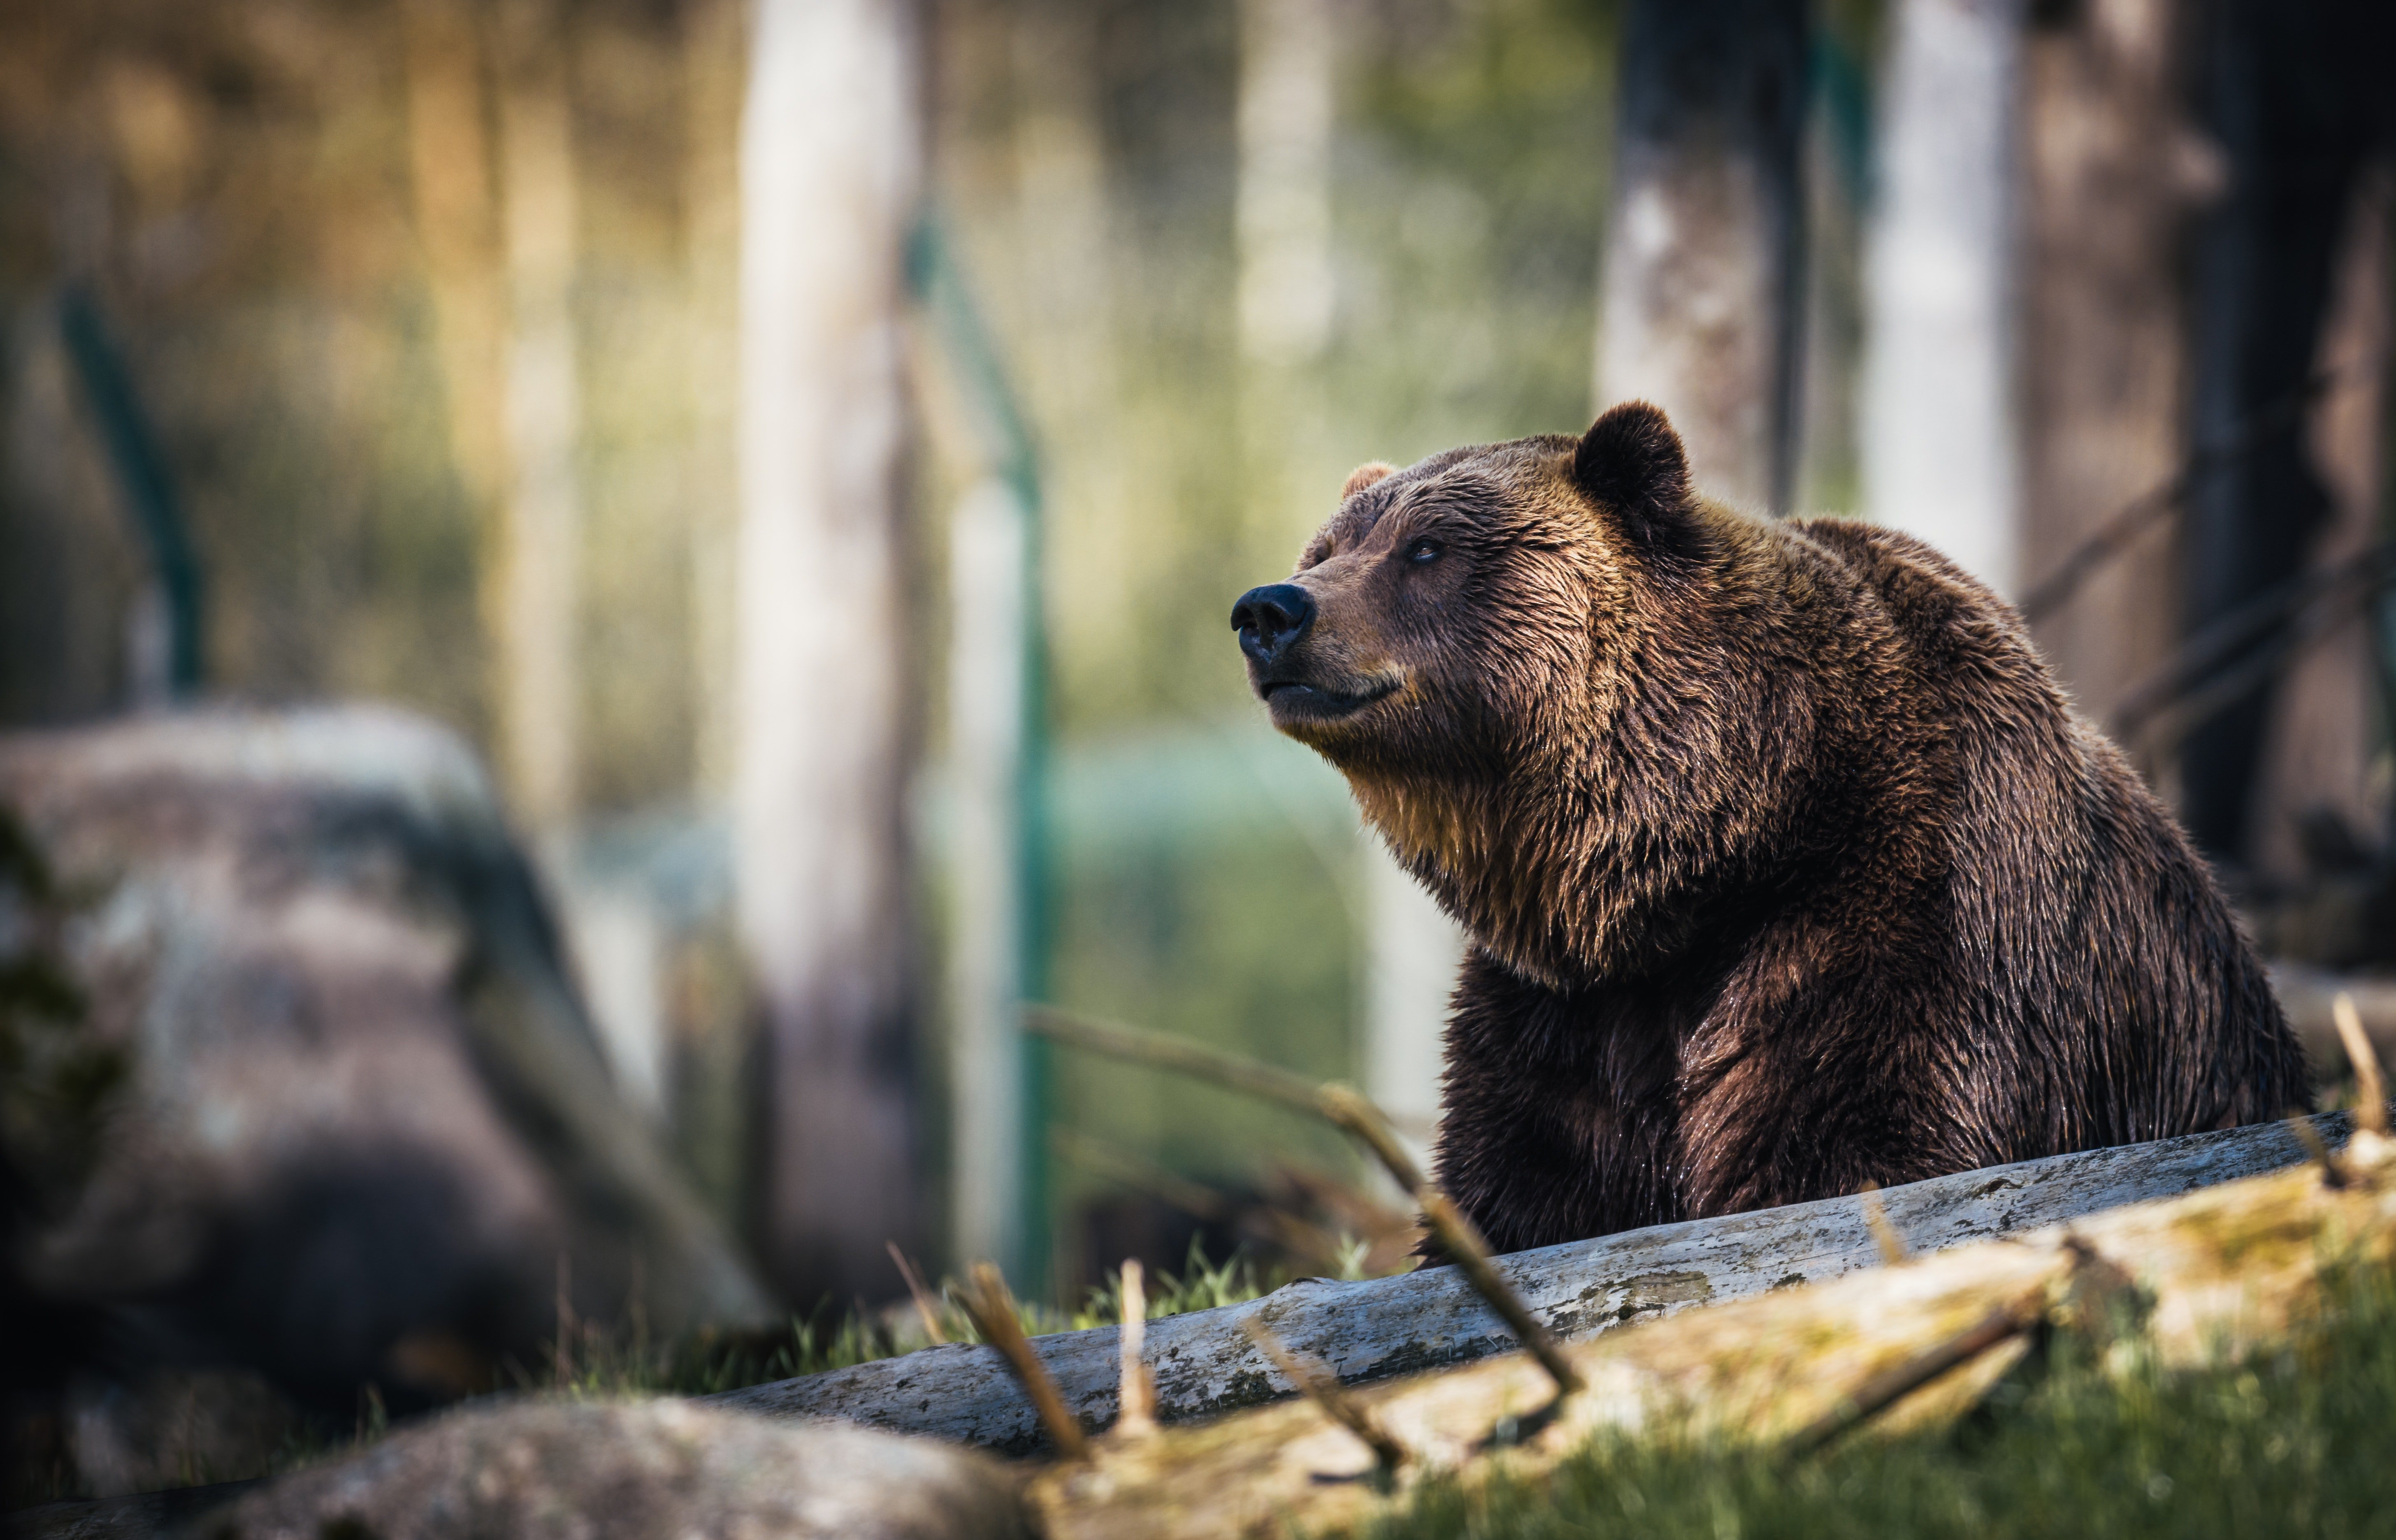 A grizzly bear can be seen in between branches | Photo: Pexels/Janko Ferlic